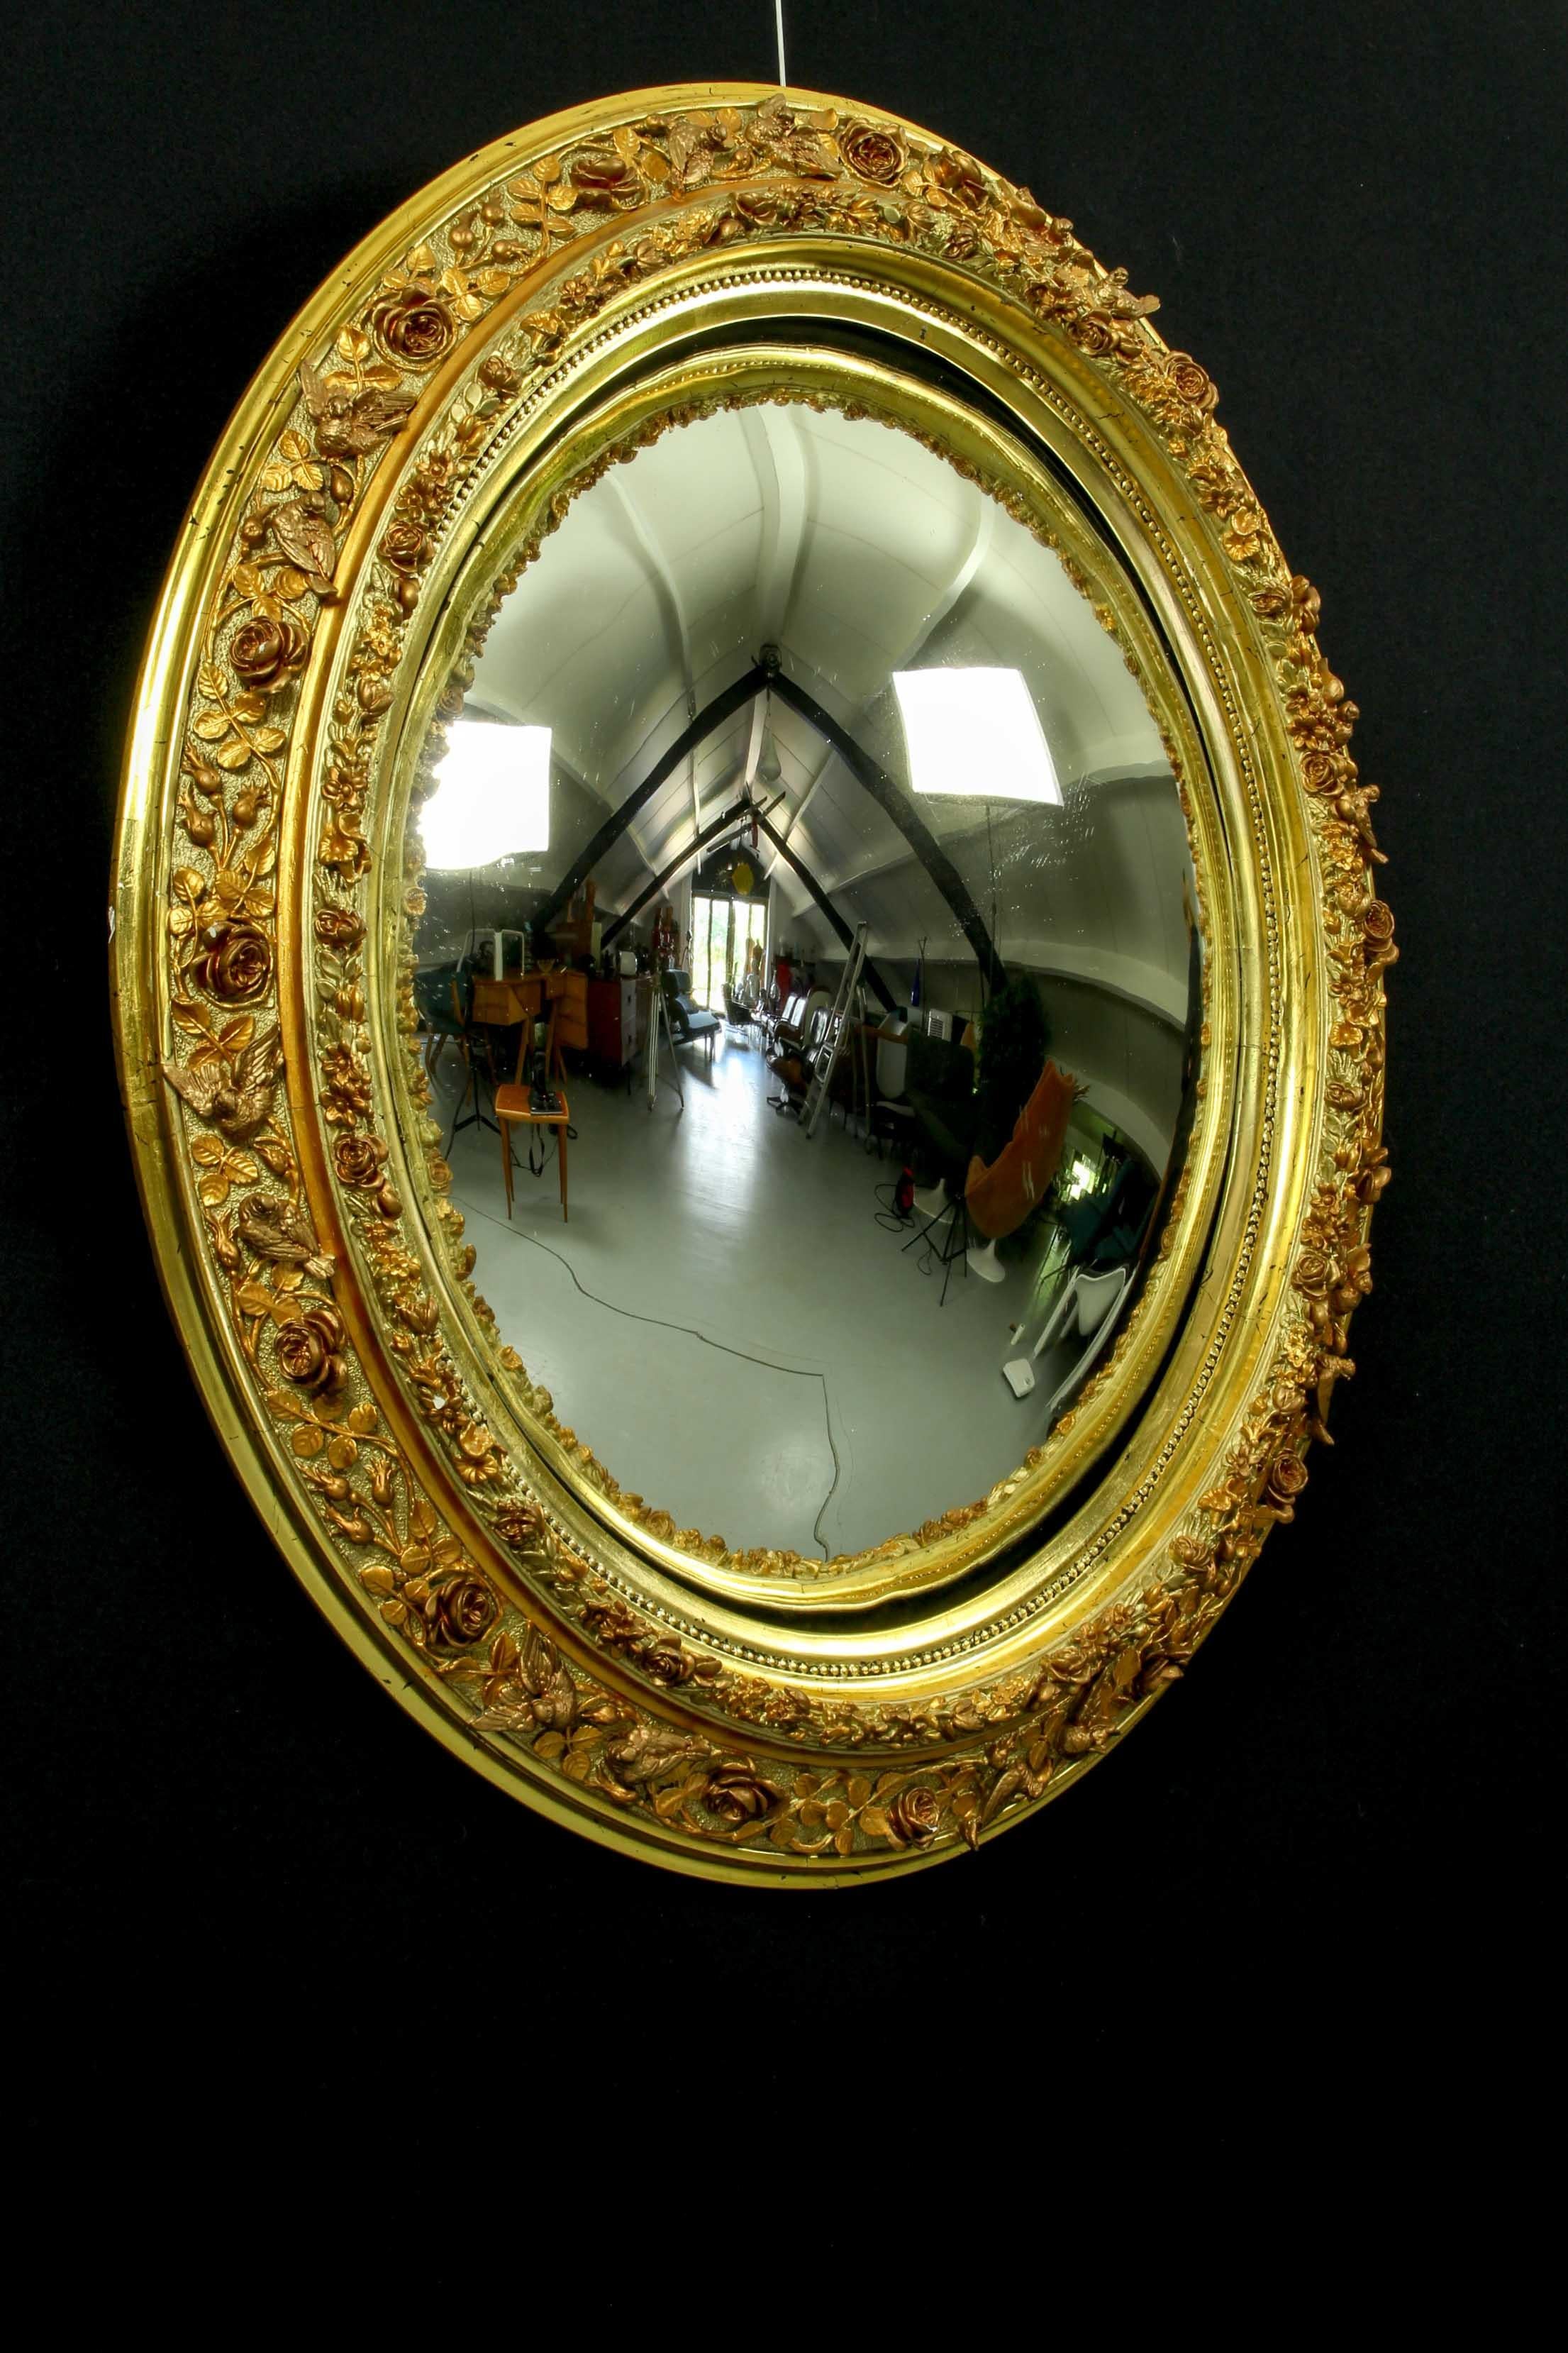 19th century French giltwood convex butler mirror decorated with roses and birds. This is a very good looking and highly decorative piece. The frame is gilt plaster over wood which was popular from the late Victorian era onwards, it has age related